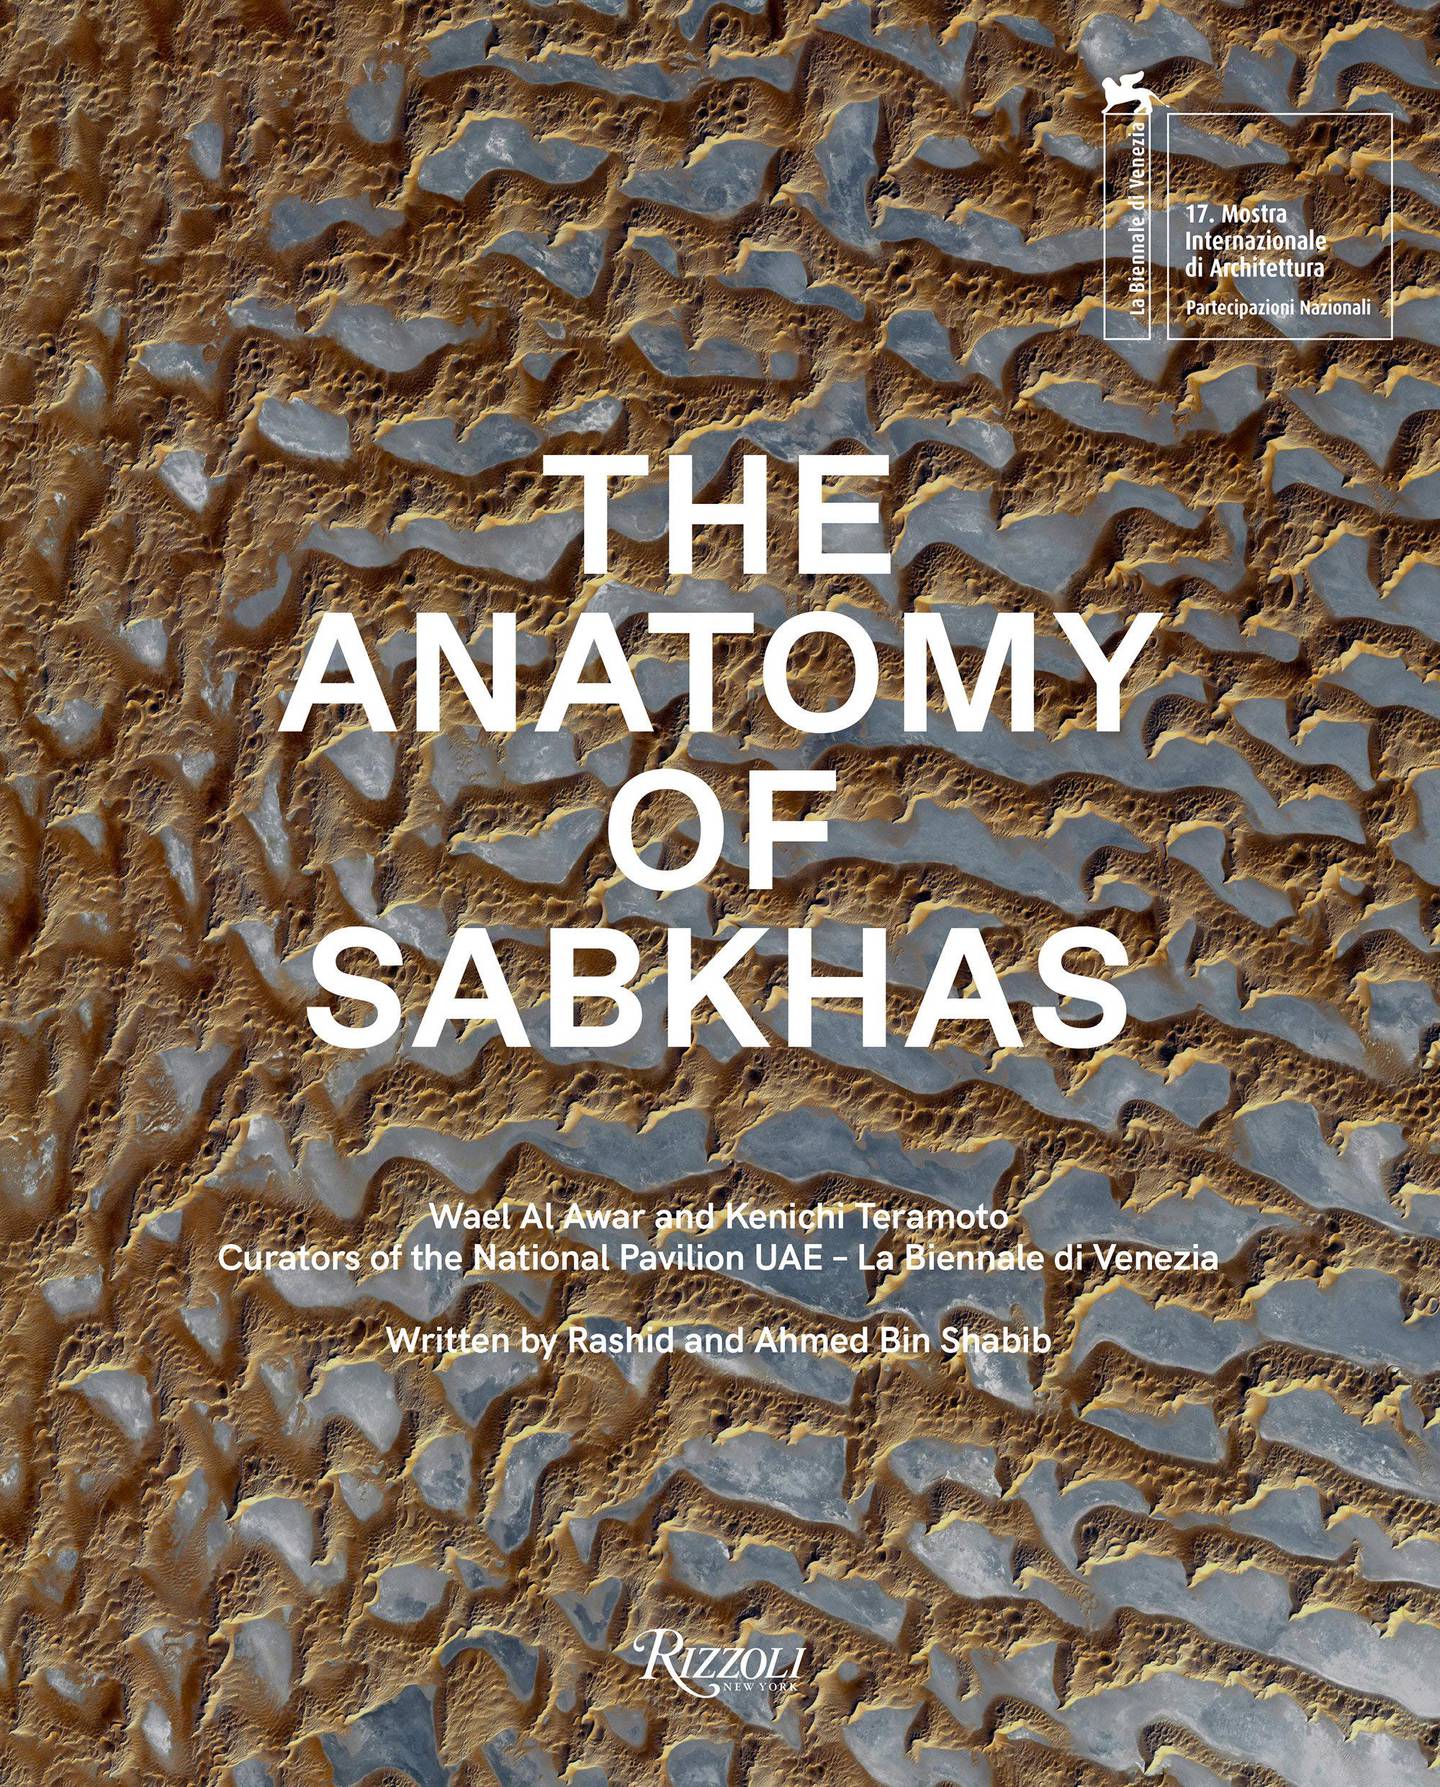 The cover of 'The Anatomy of Sabkhas'. Photo: Rizzoli